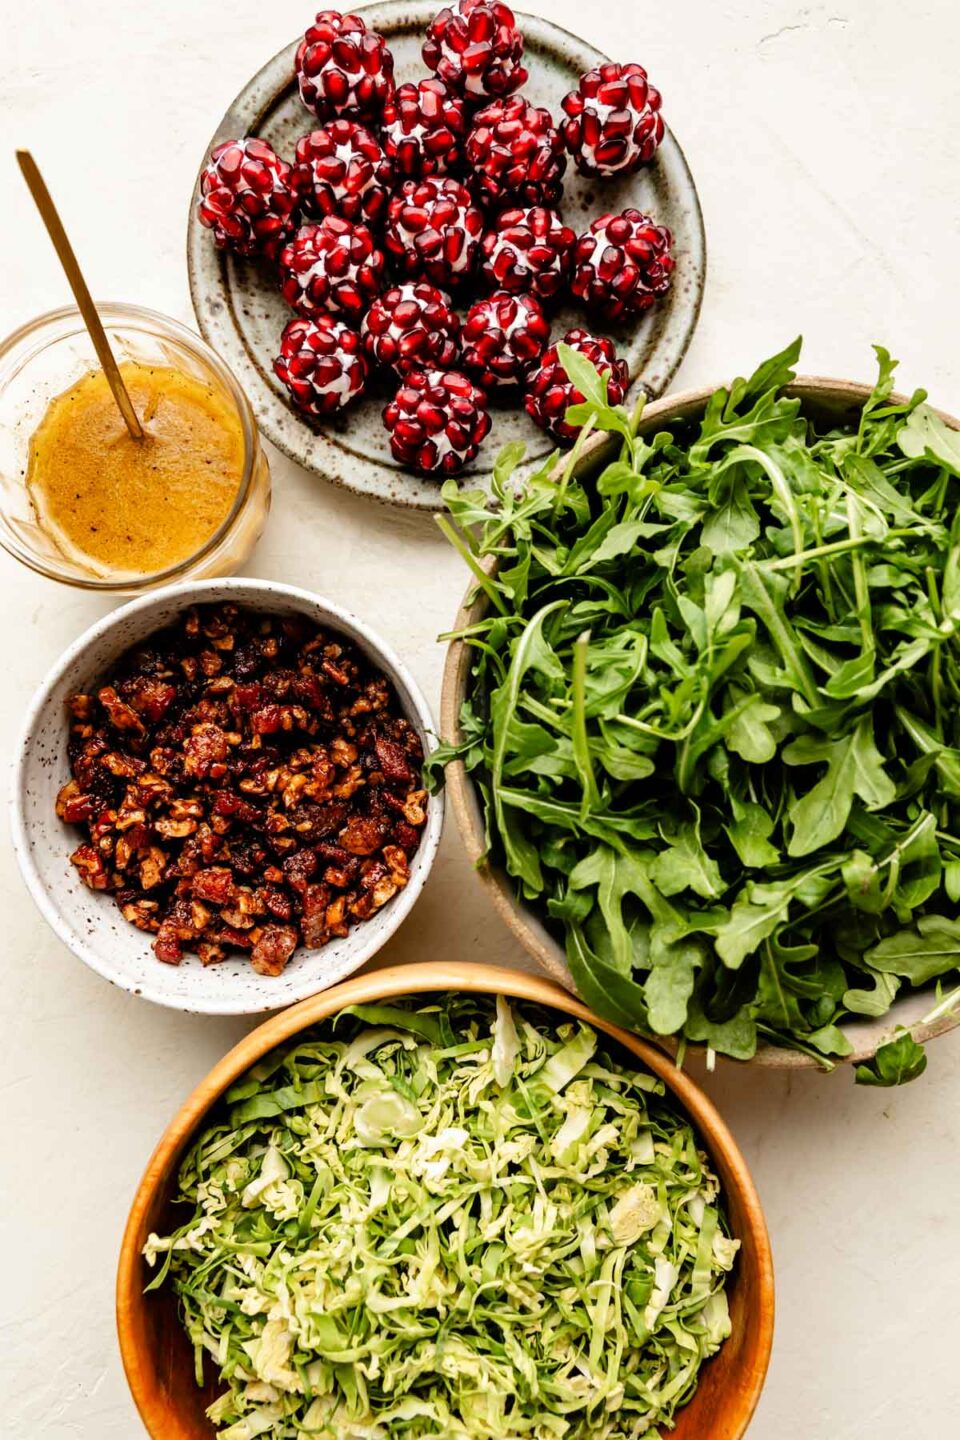 An overhead shot of ingredients displayed atop an off-white surface: baby arugula, shaved brussels sprouts, candied nuts, a jar of dressing and a plate of pomegranate goat cheese balls.